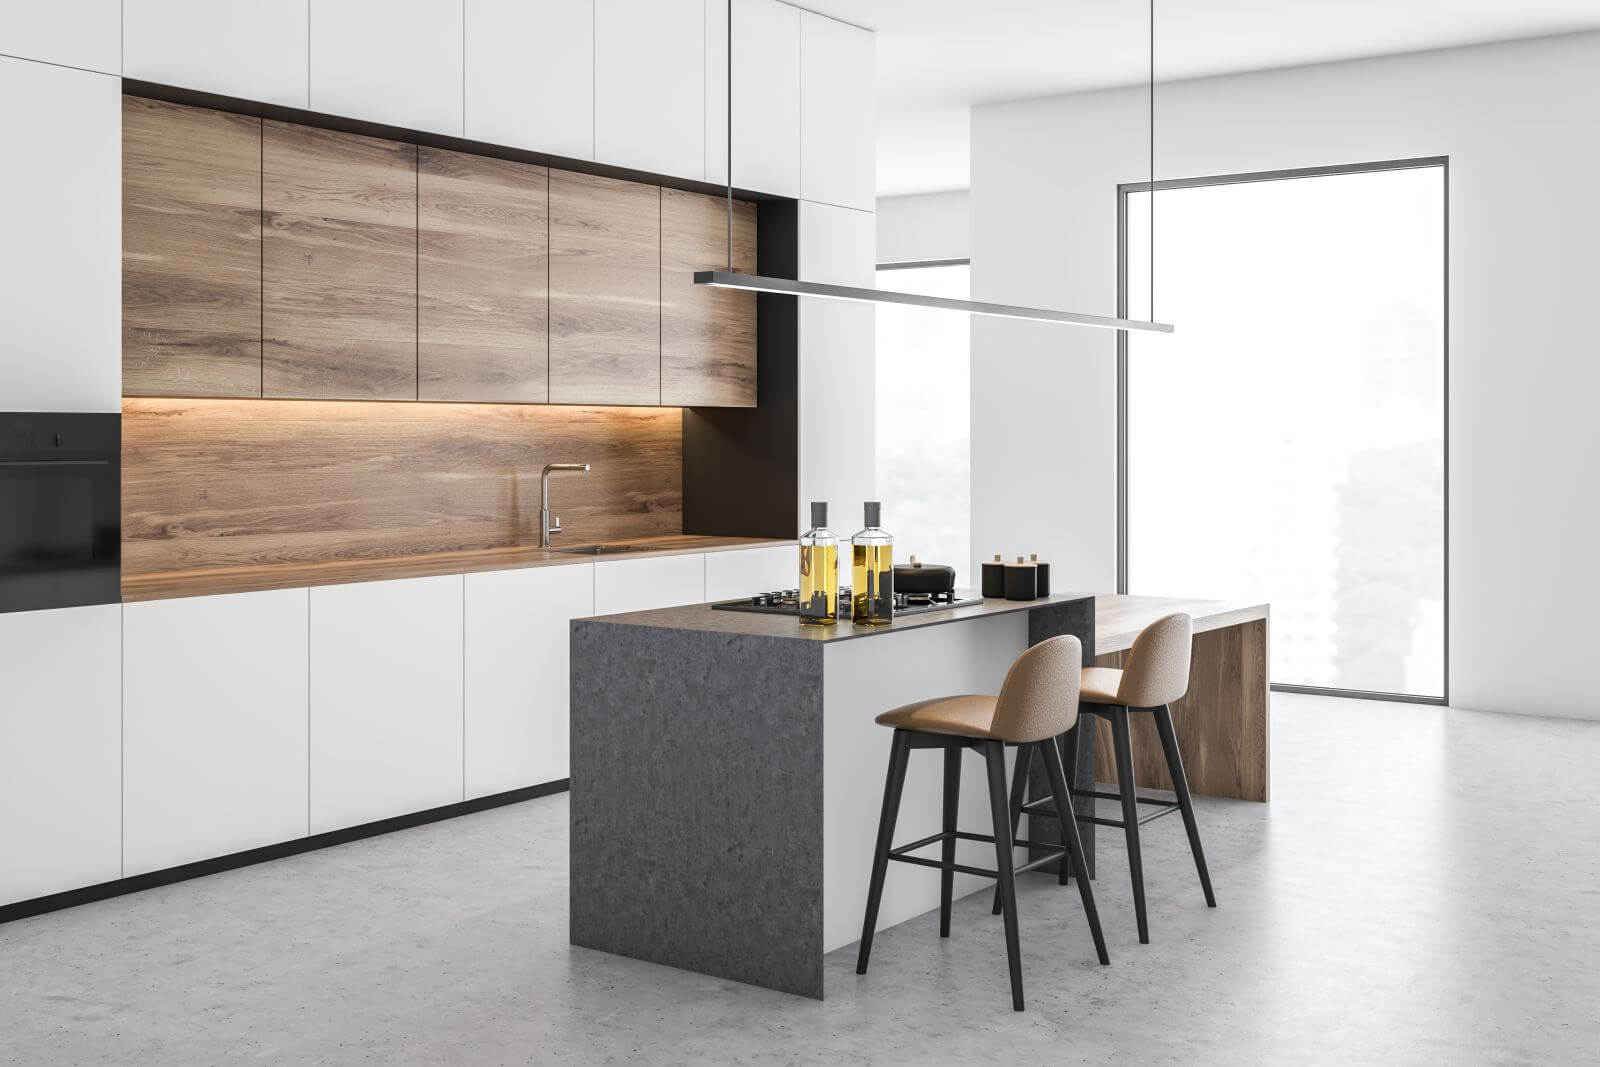 Corner of loft kitchen with white walls, concrete floor, white countertops, wooden cupboards, gray island and wooden bar with stools. 3d rendering